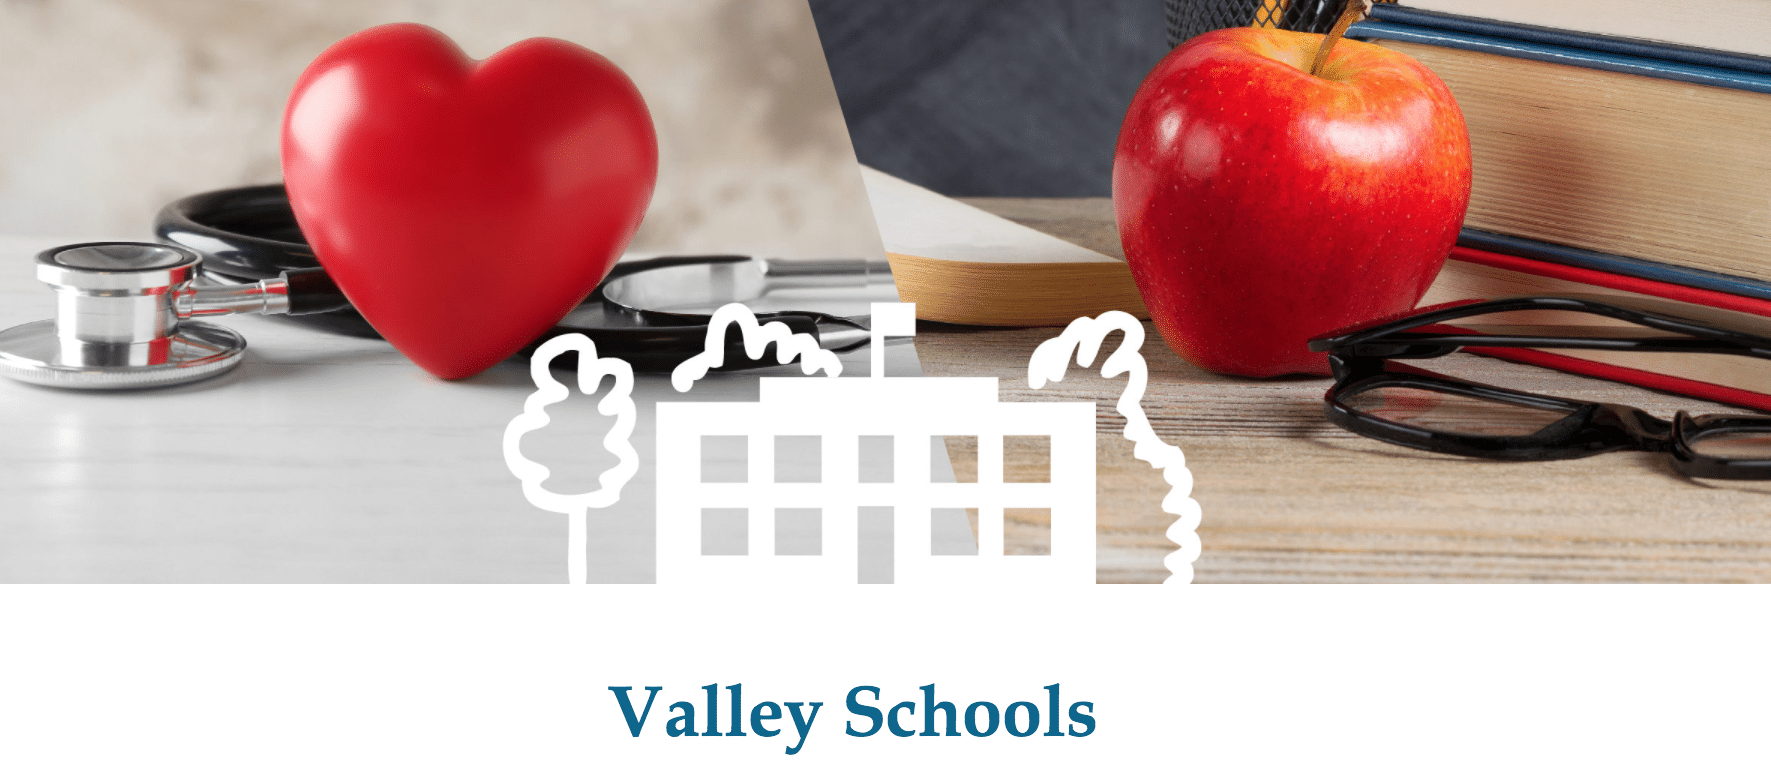 The new Valley Schools logo to show off our new website